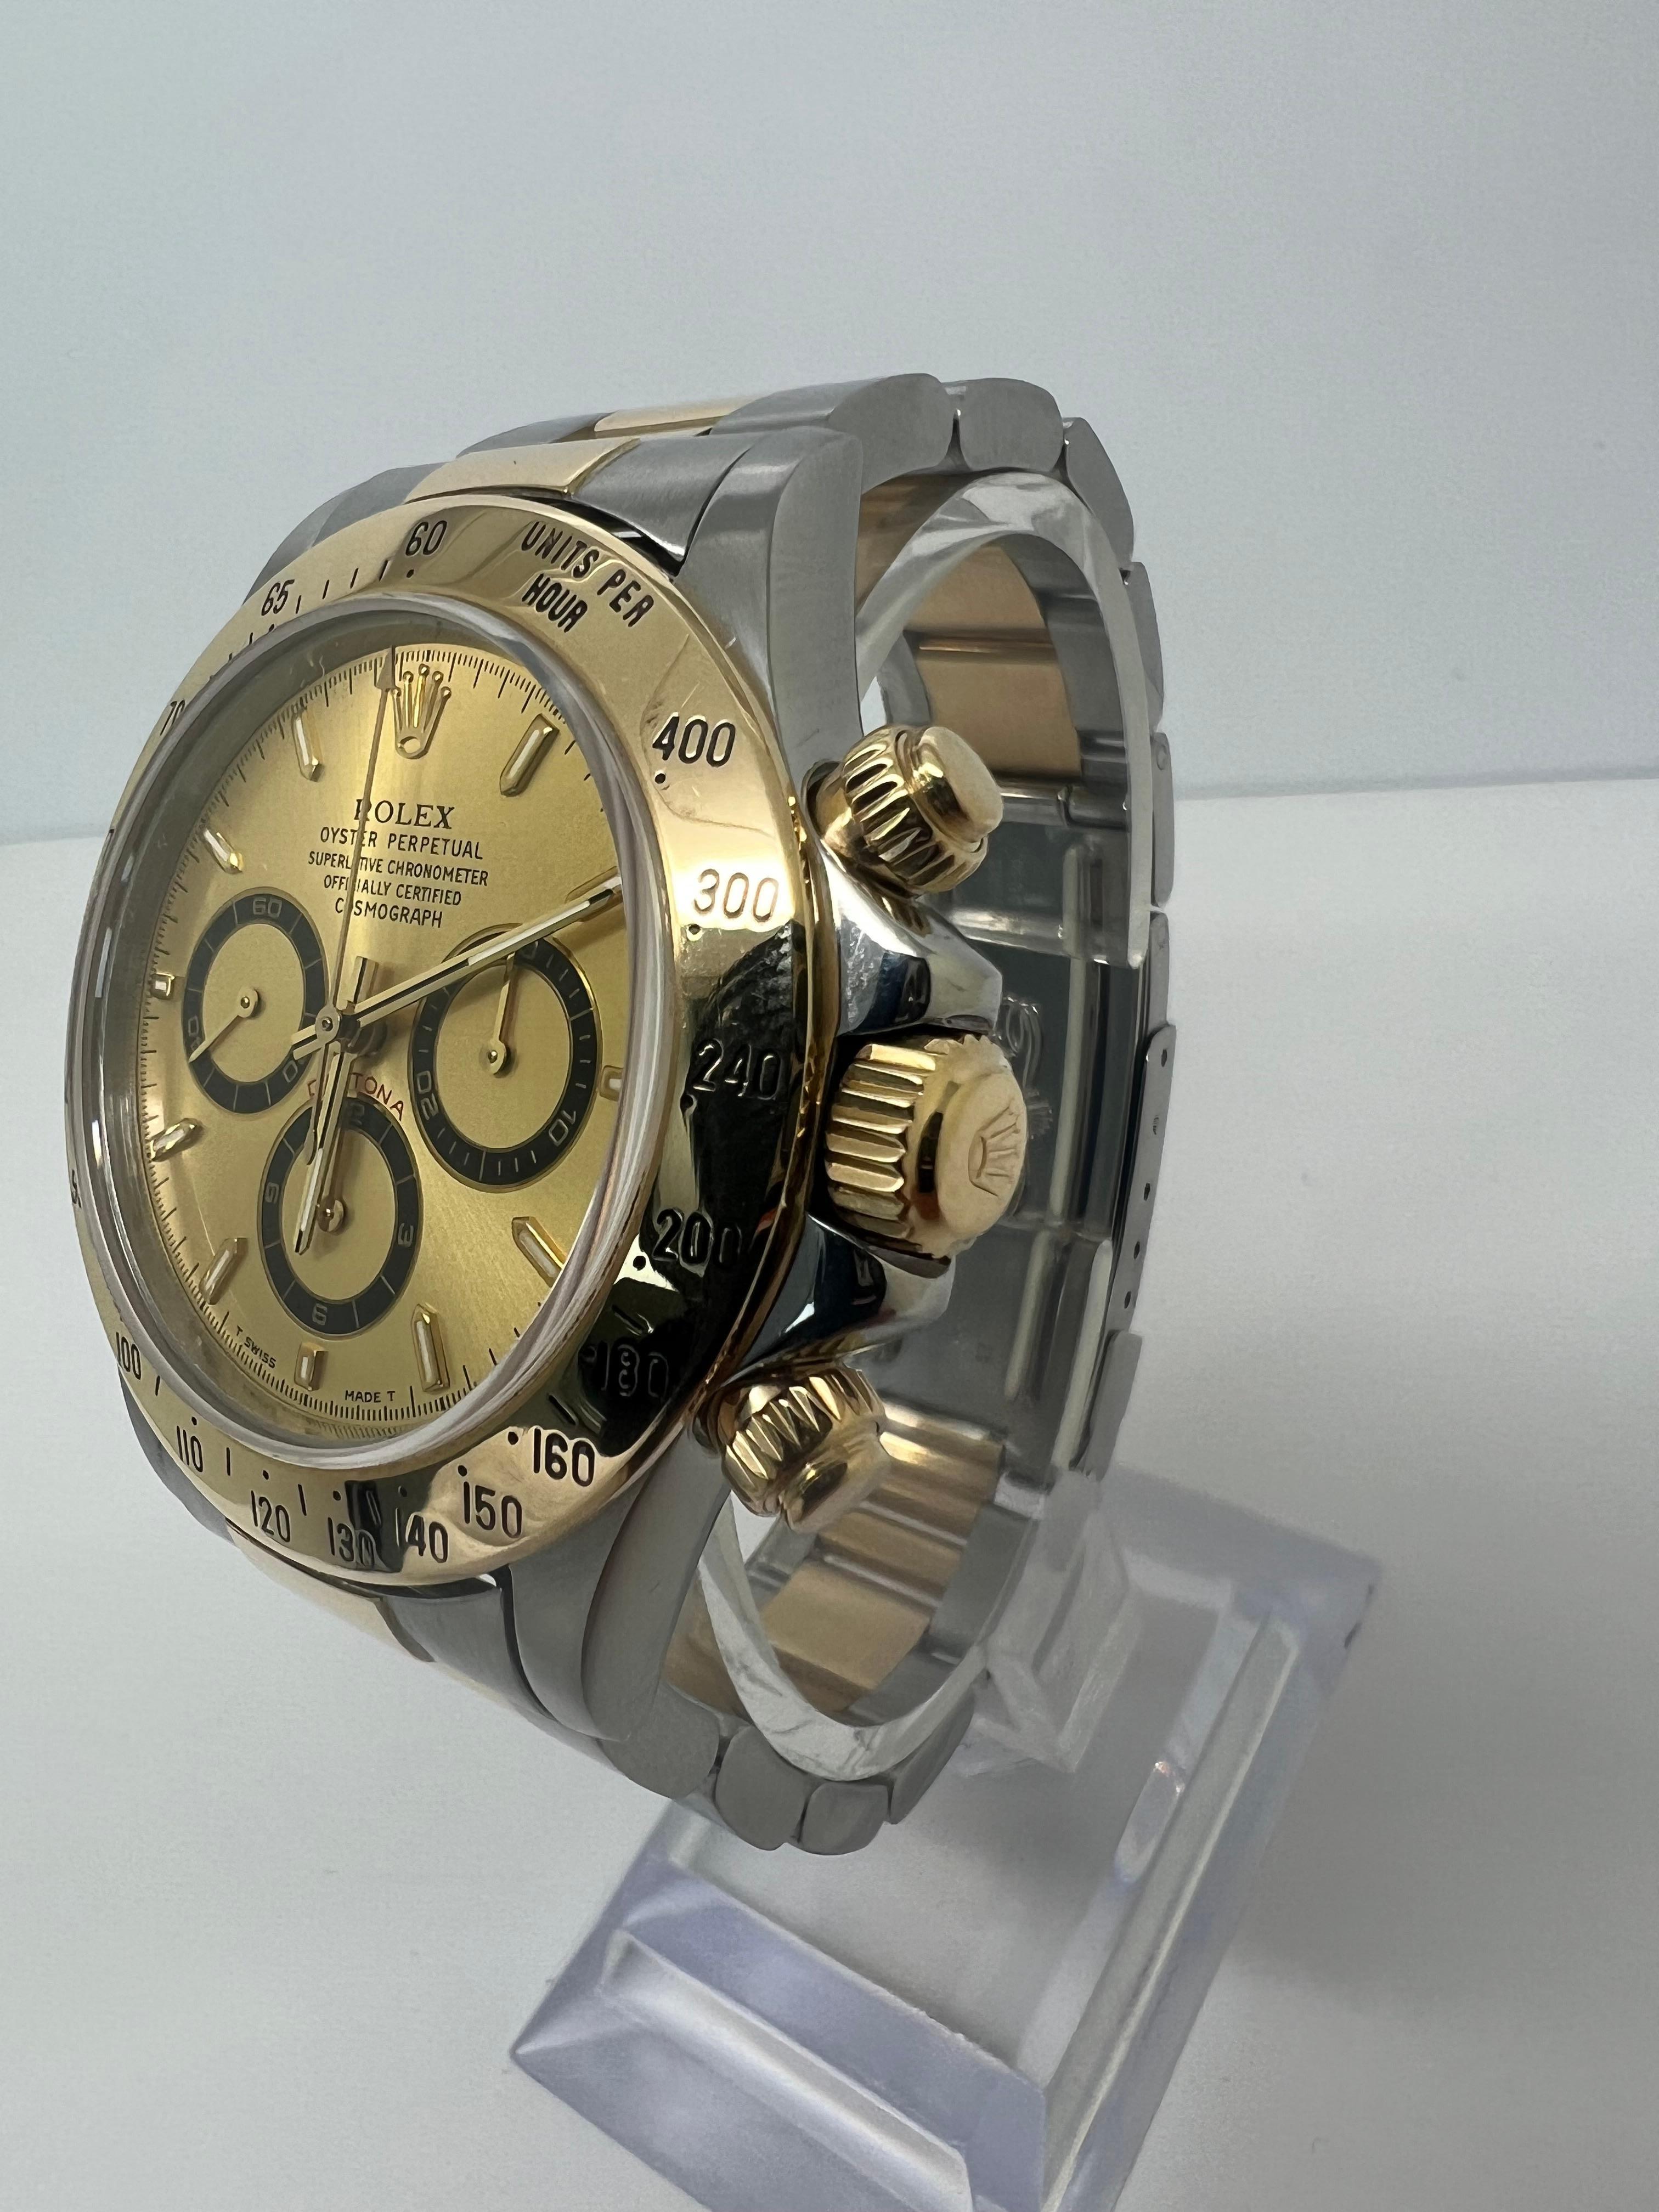 Rolex Cosmograph Daytona Champagne Men's Watch - 16523

Excellent condition

comes with Rolex Box and certificate of authenticity

free overnight shipping

fits 8 inch wrist

shop with confidence

Evita Diamonds